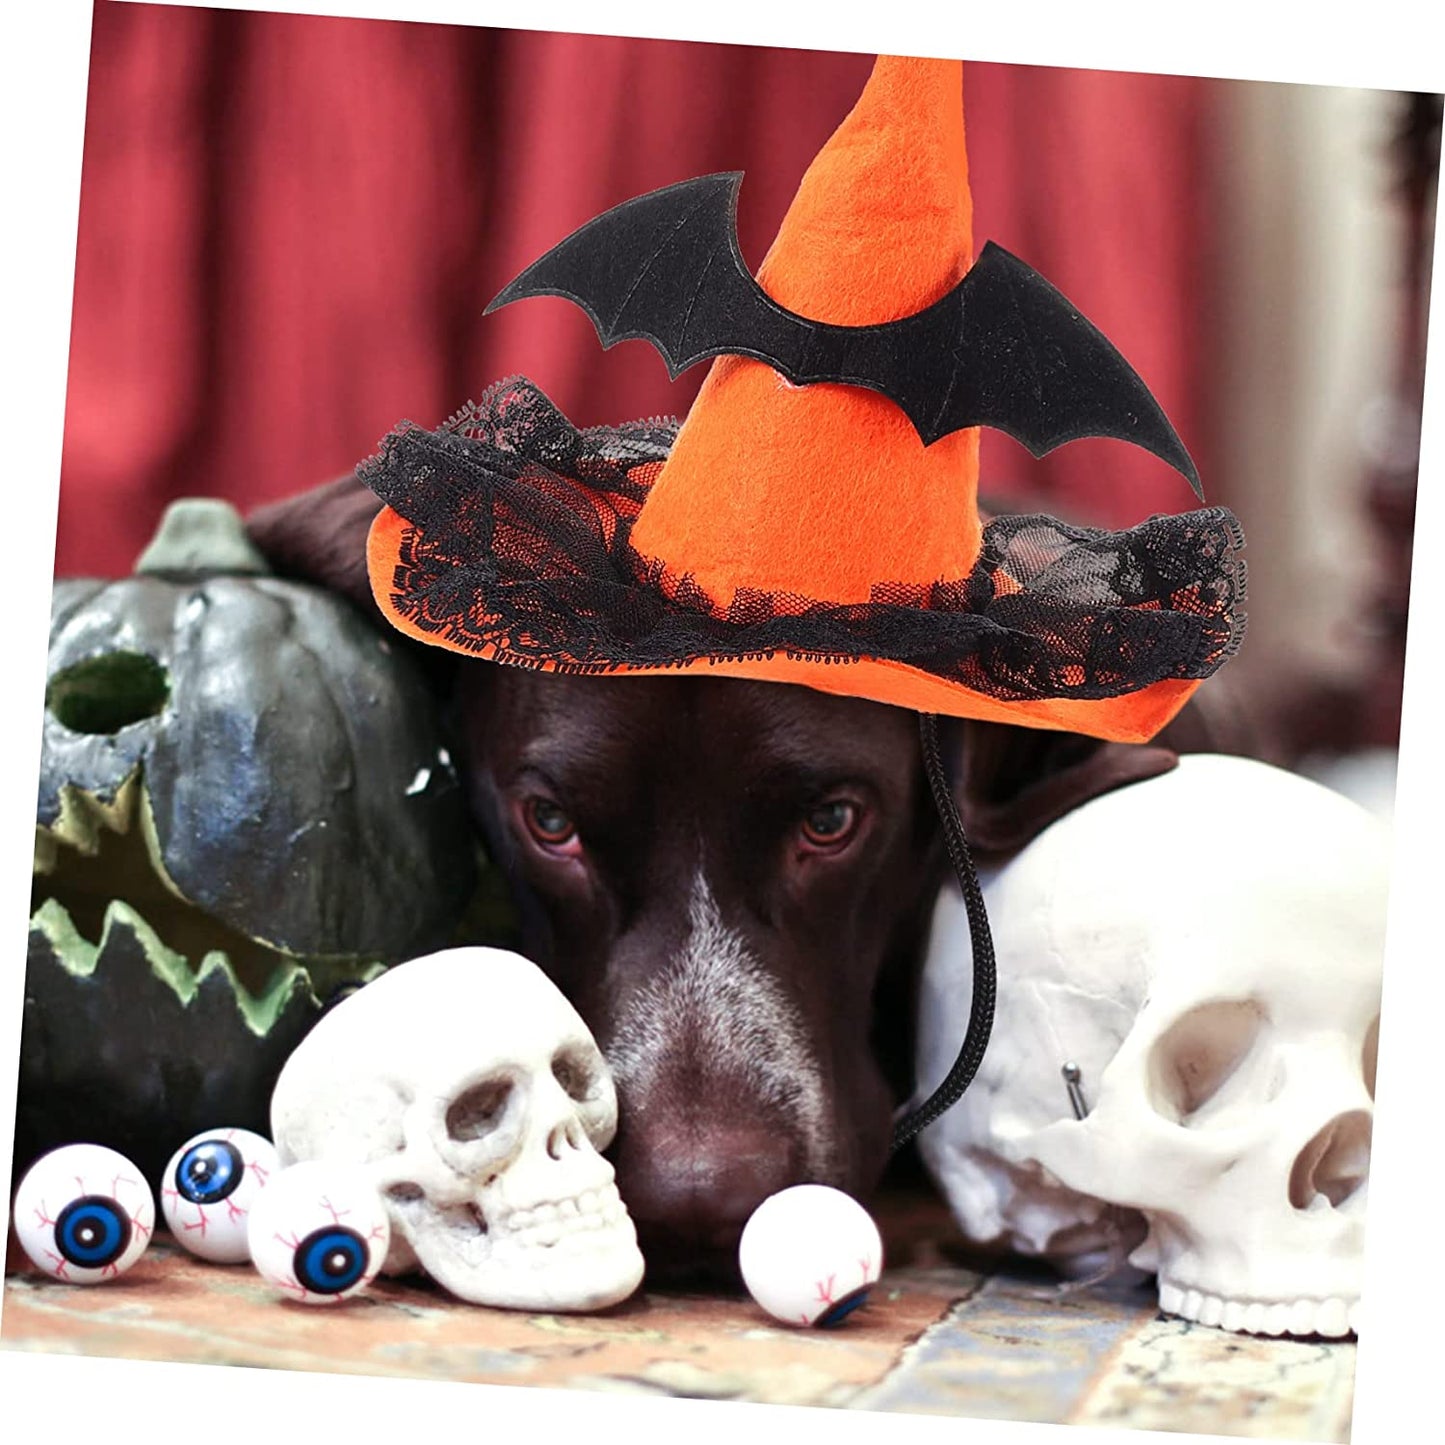 Balacoo Wizard Hat Adorable Decorative Costume for Props Witch Headgear Theme with Costumes Cute Supply Cone Lace Pet Dog Wear-Resistant Supplies Themed Hats Bat Black Pumpkin Funny